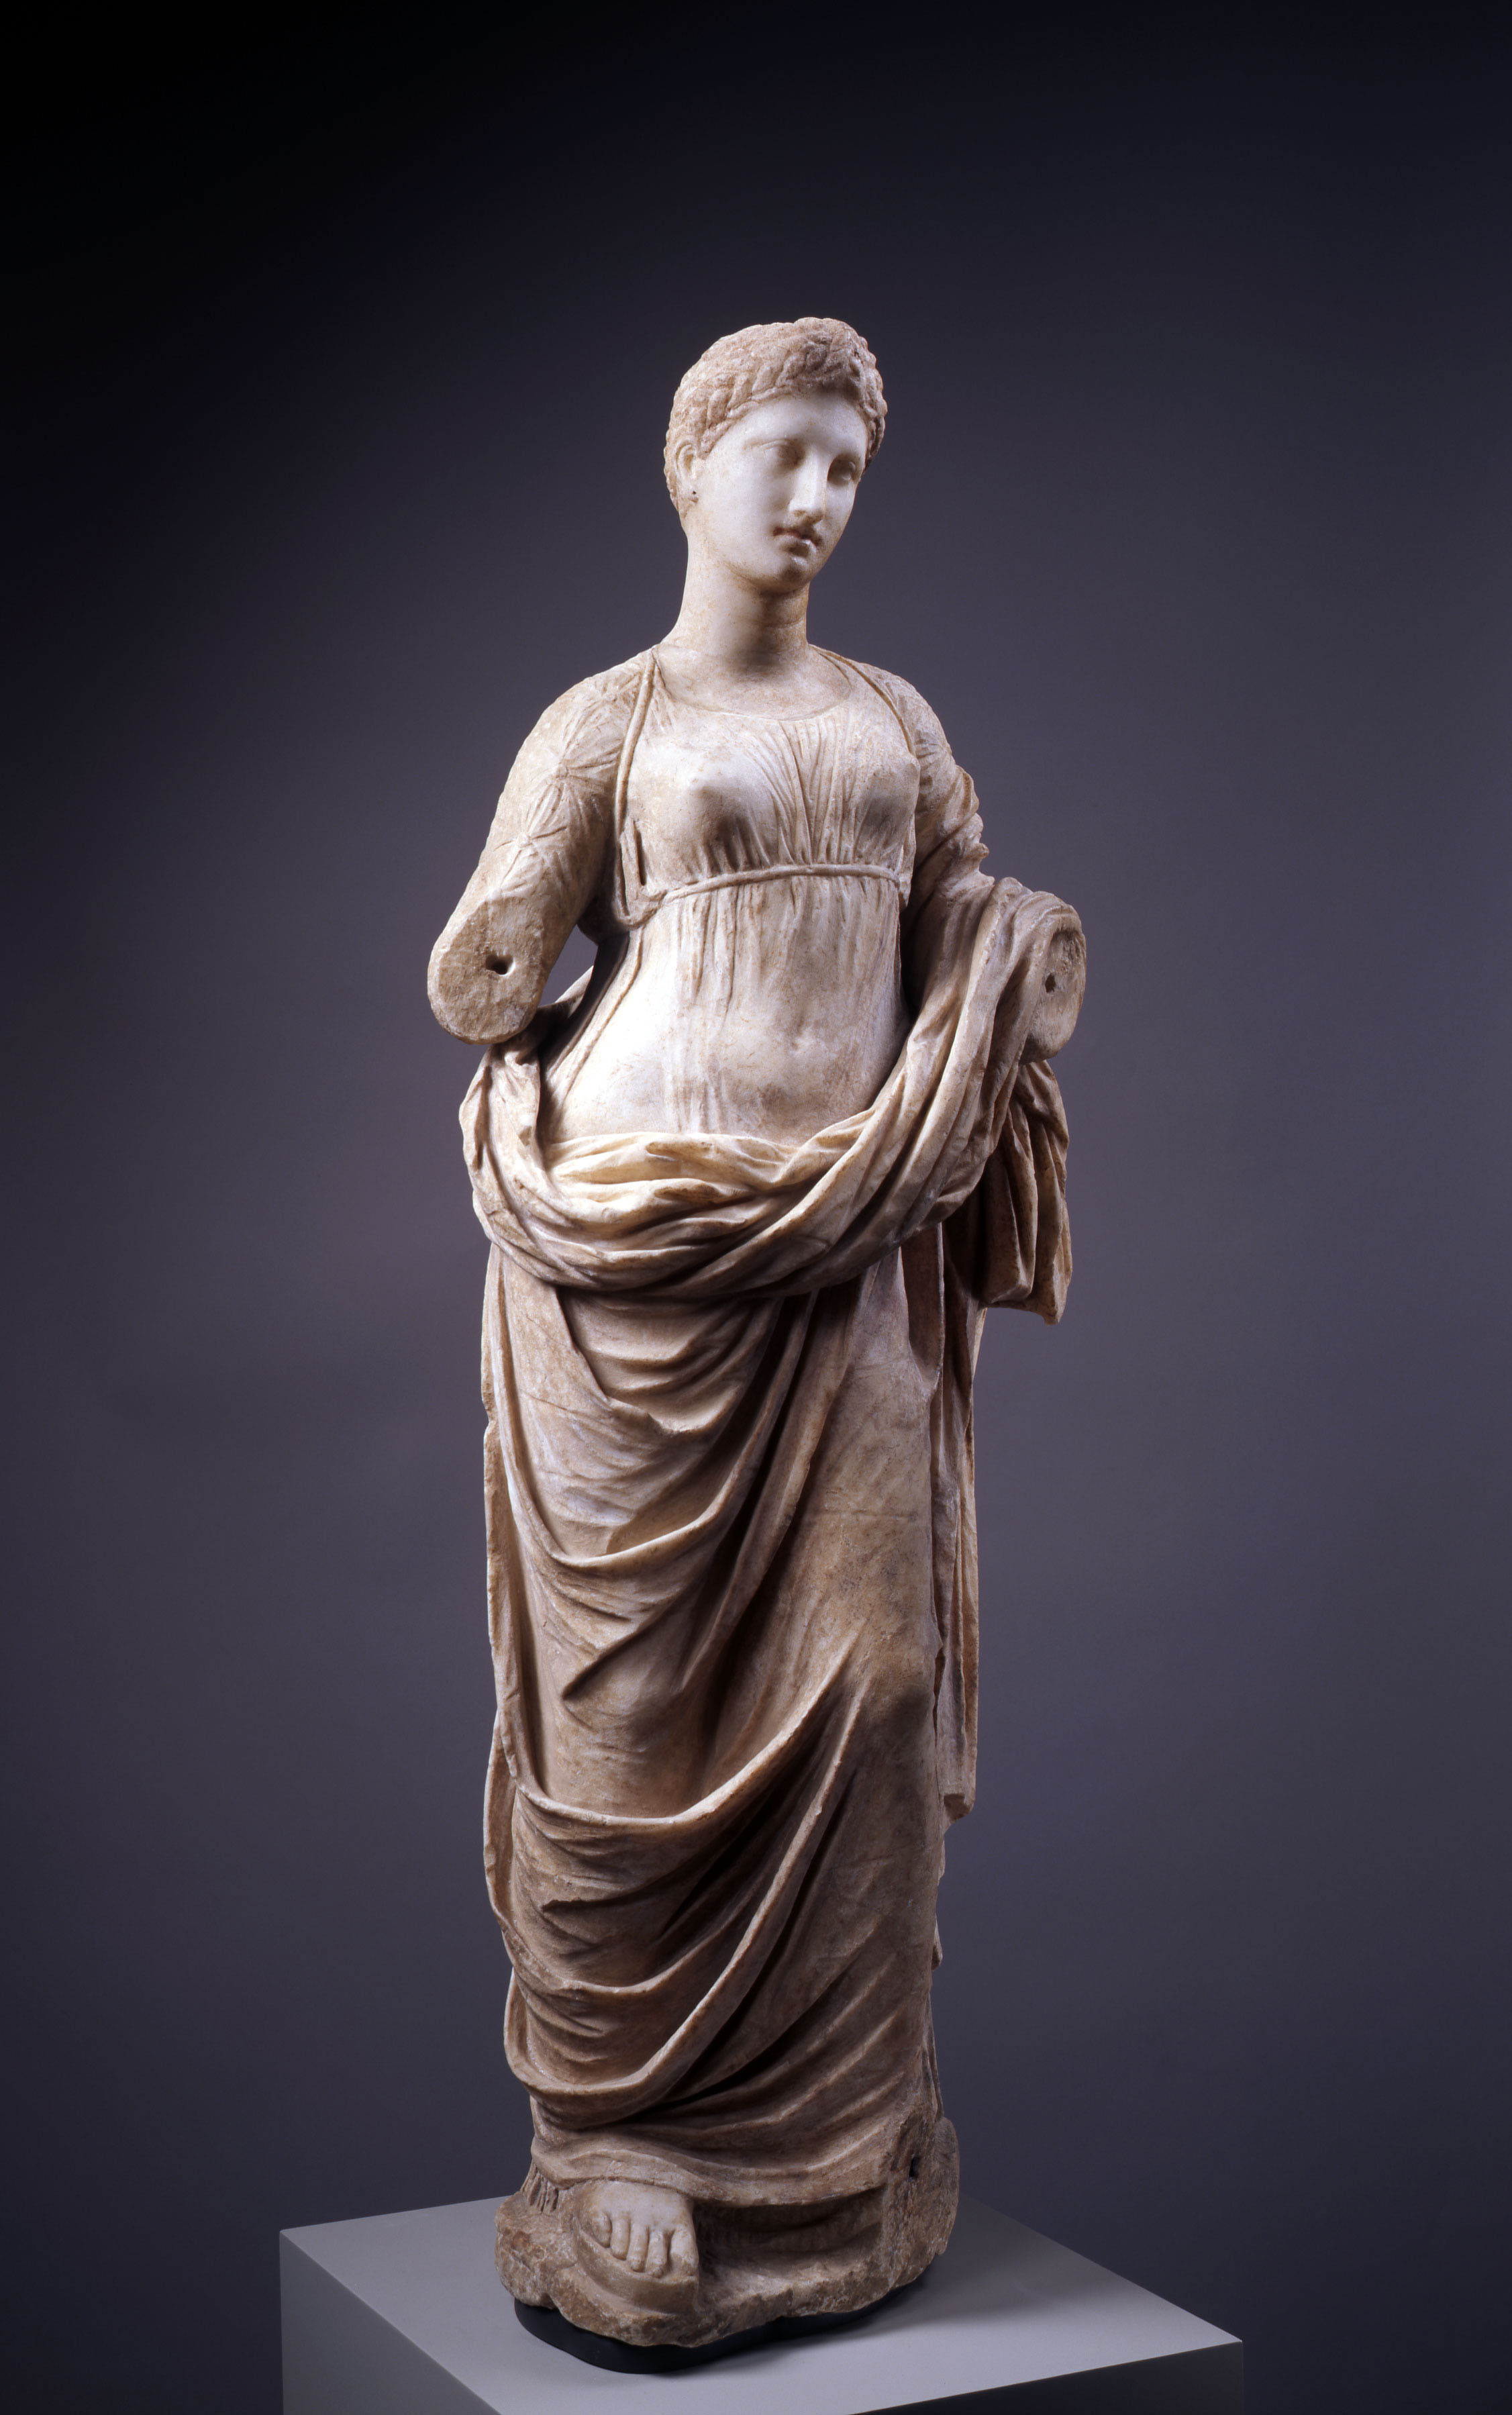 Statue of a Goddess or Muse (Terpsichore).  Greek.  Hellenistic, mid 2nd Century BCE.  Marble.  Carlos Collection of Ancient Art.  2002.31.1A/B   © Bruce M. White, 2004. 